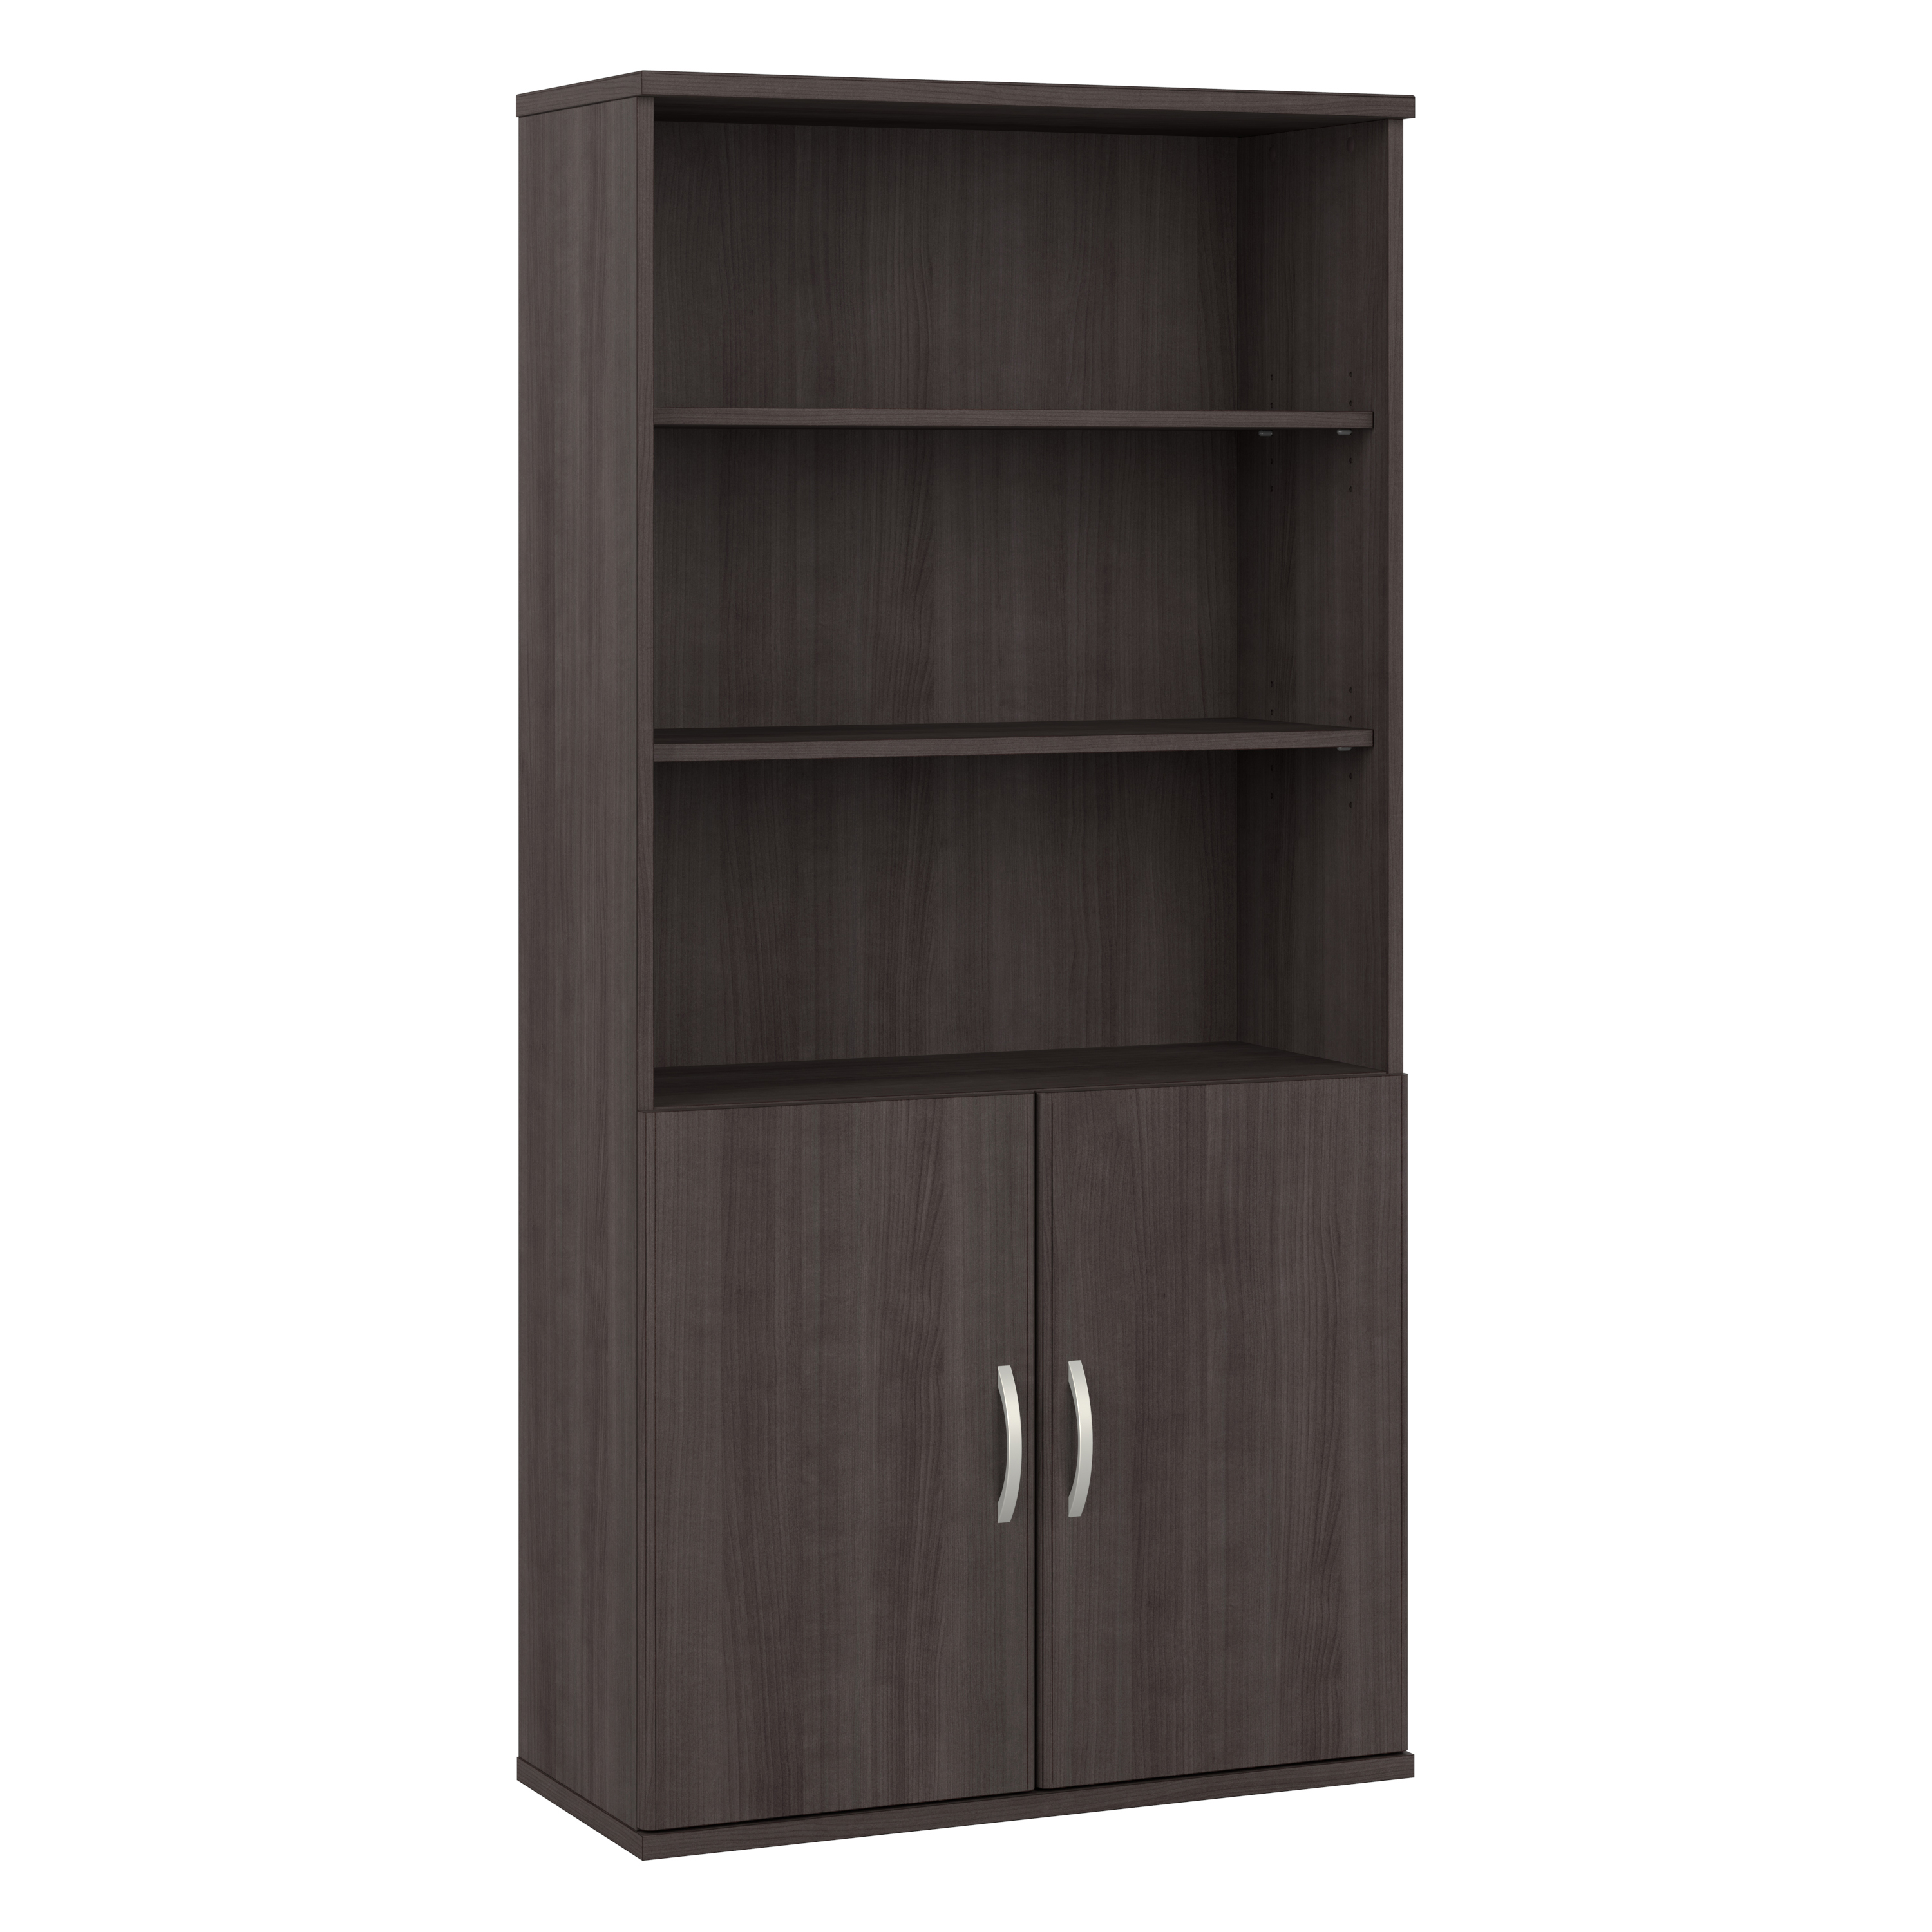 Shop Bush Business Furniture Studio A Tall 5 Shelf Bookcase with Doors 02 STA010SG #color_storm gray